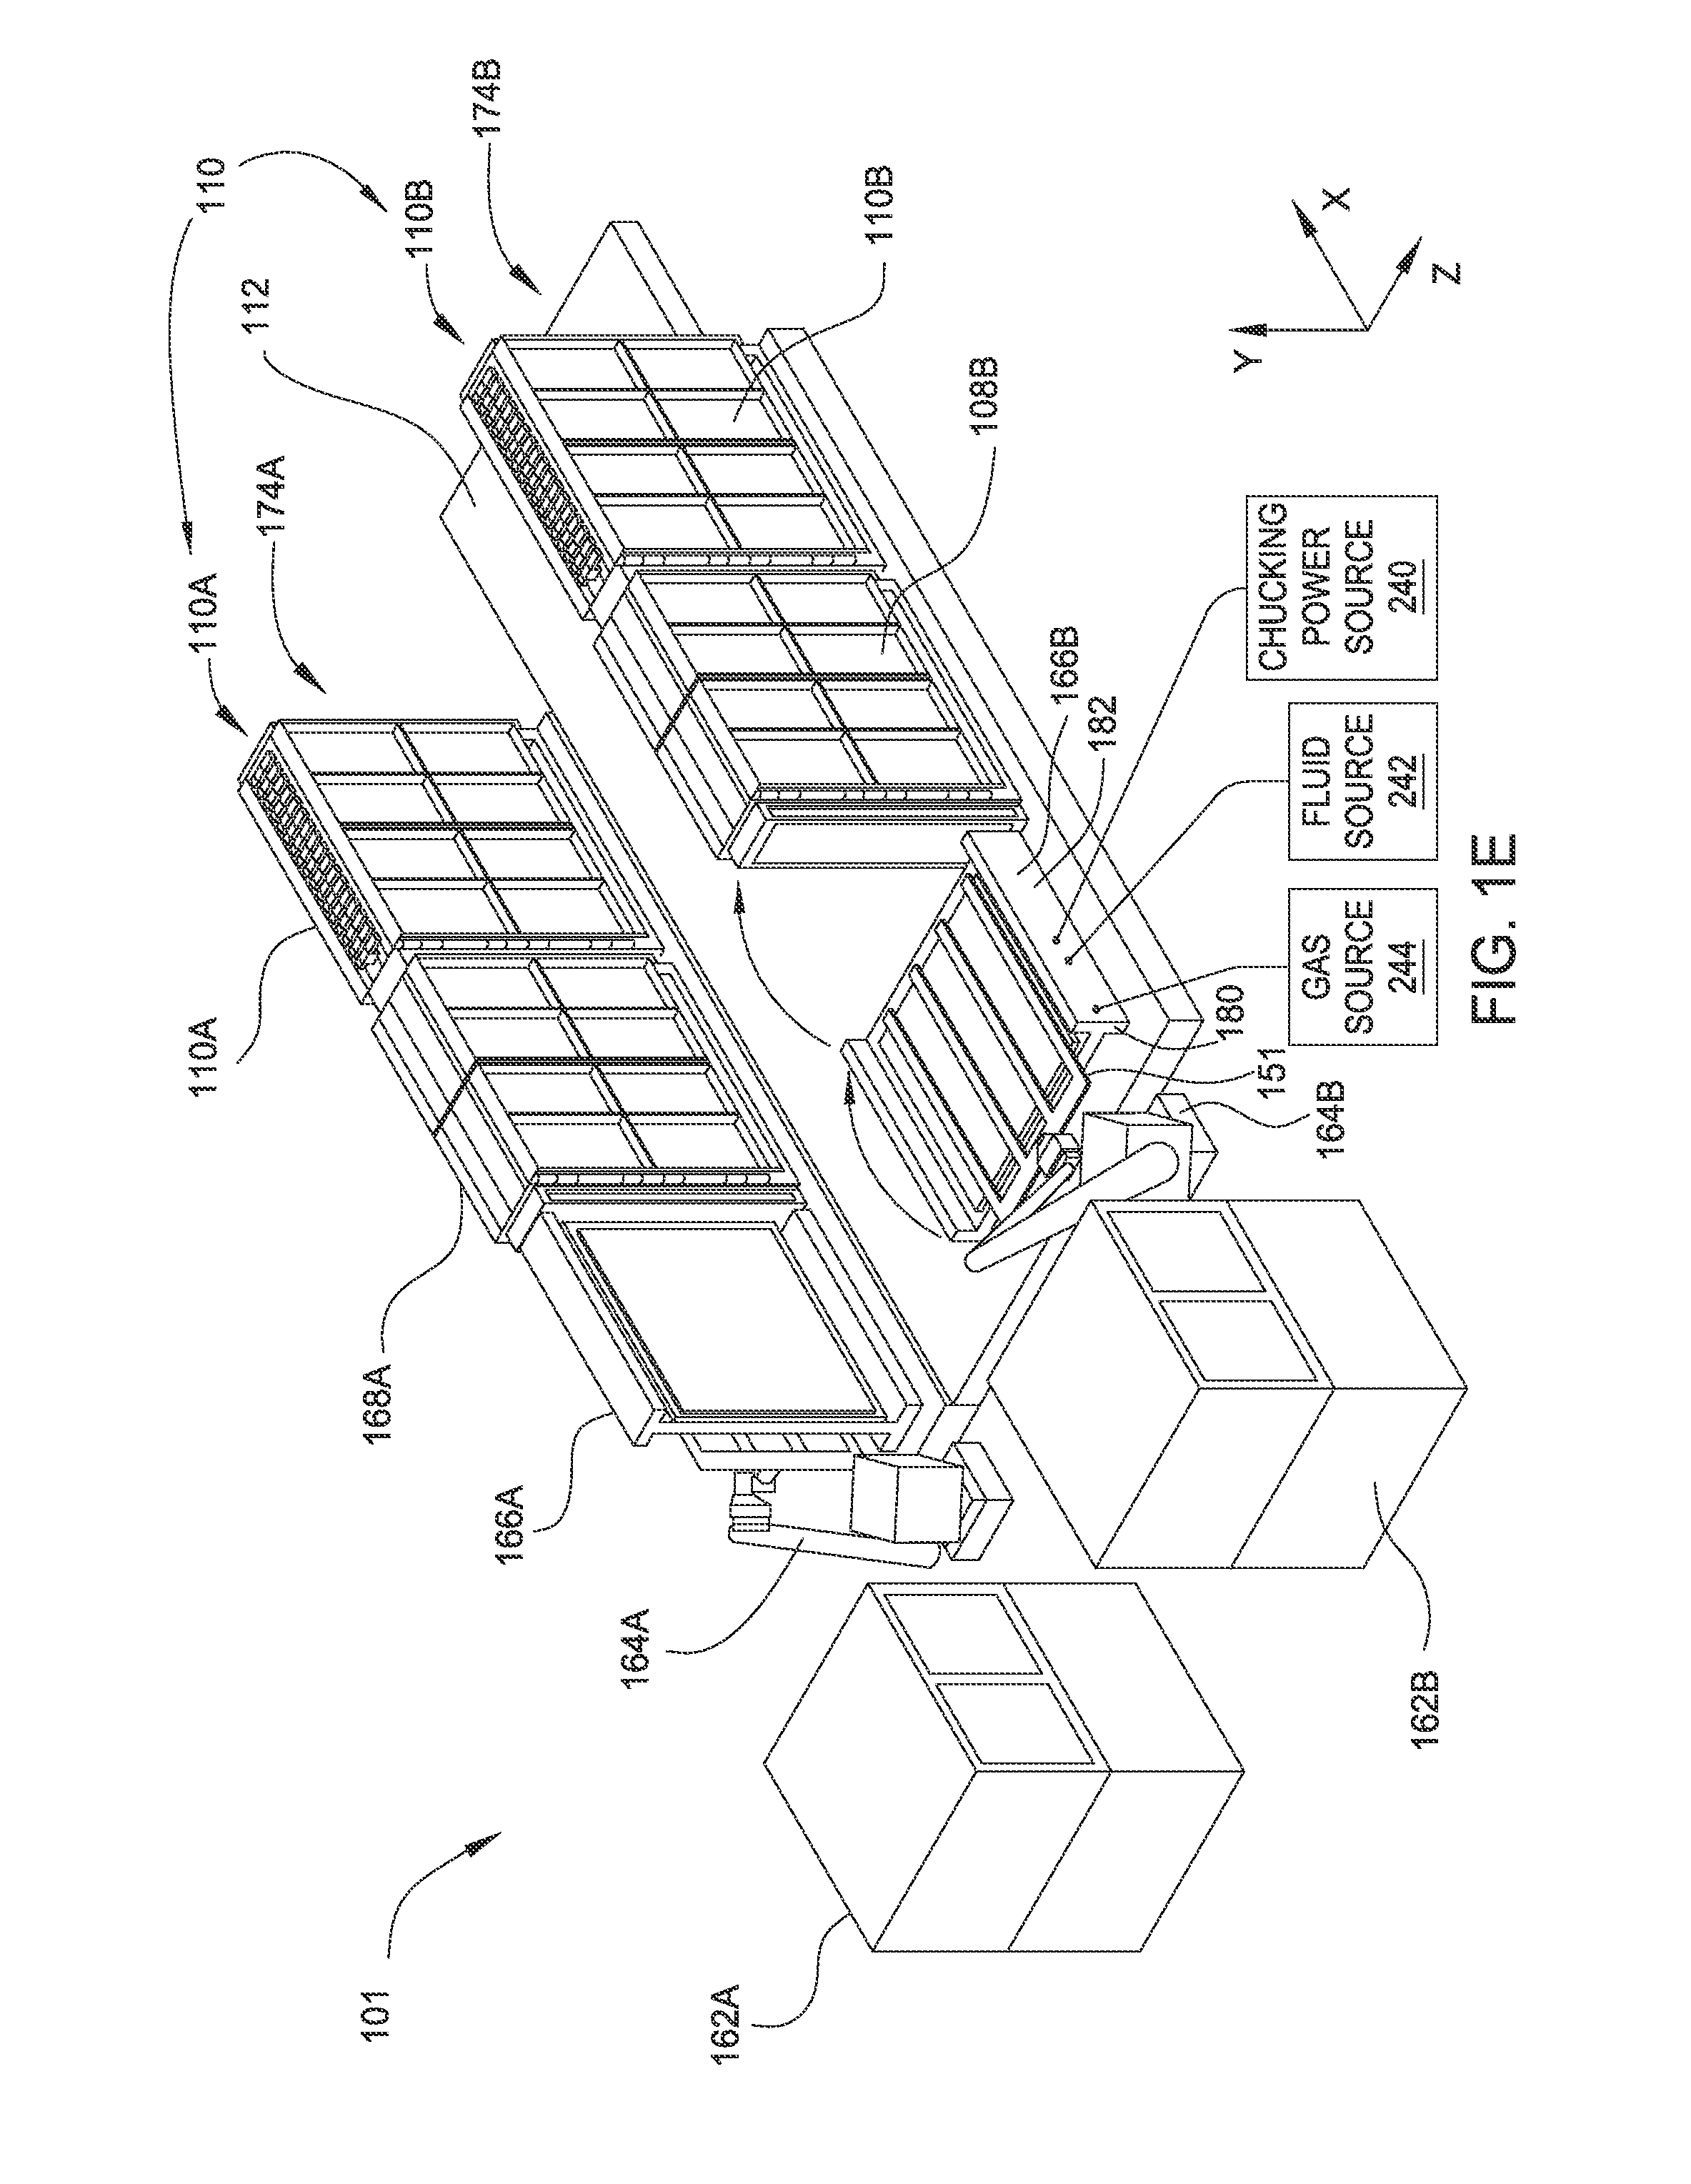 Substrate carrier with integrated electrostatic chuck